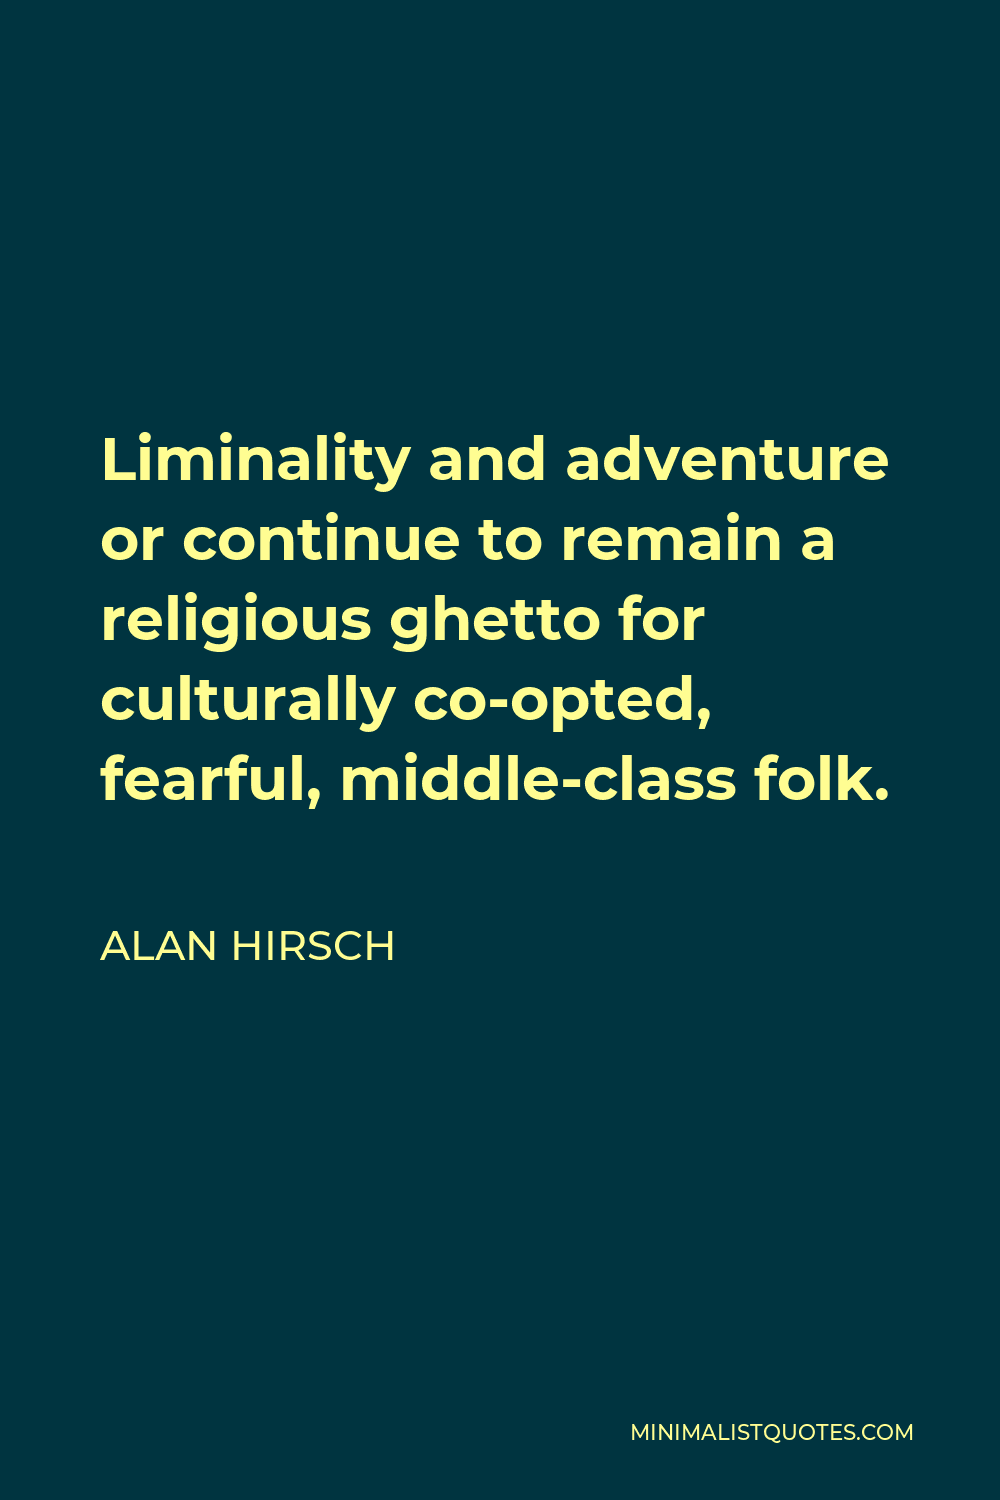 Alan Hirsch Quote - Liminality and adventure or continue to remain a religious ghetto for culturally co-opted, fearful, middle-class folk.